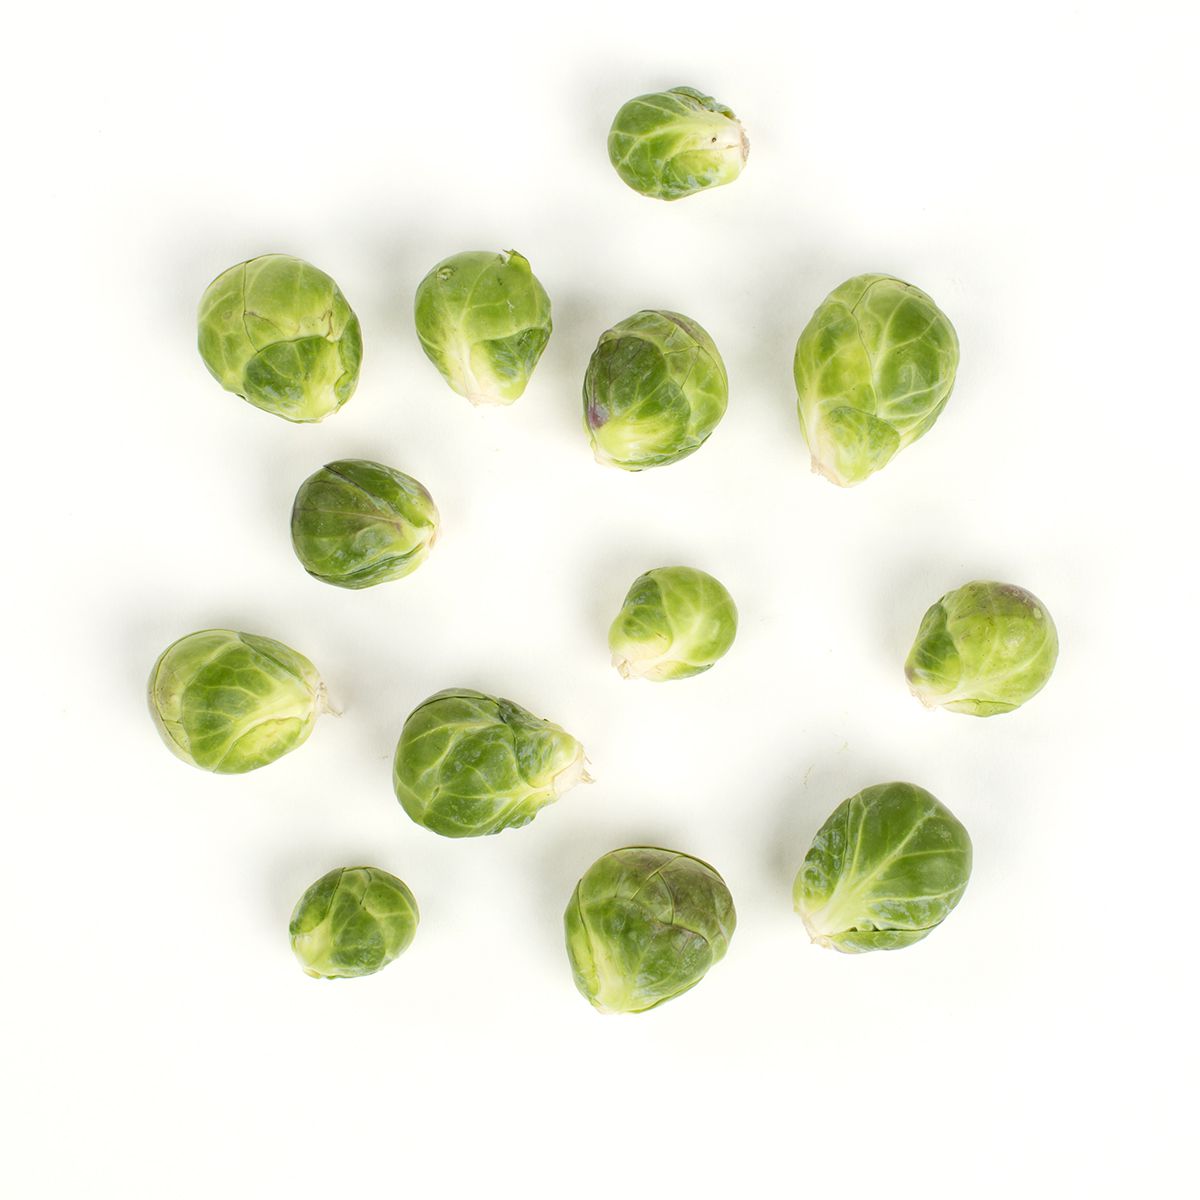 BoxNCase Organic Brussels Sprouts 1 LB